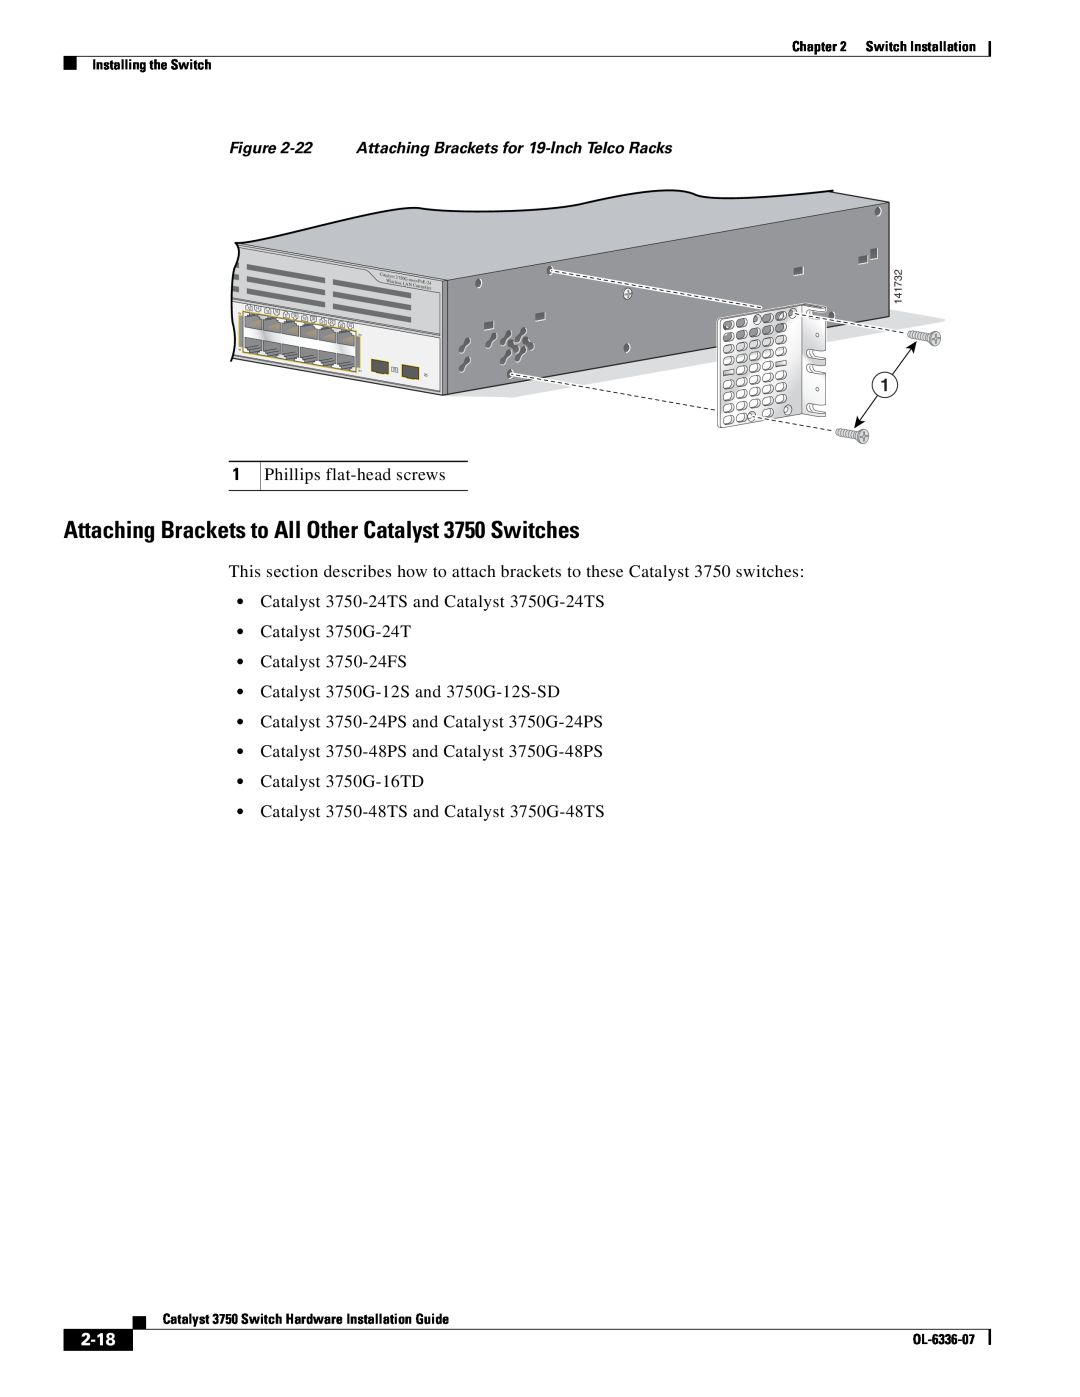 Cisco Systems WSC3750X24TS specifications Attaching Brackets to All Other Catalyst 3750 Switches, 2-18 